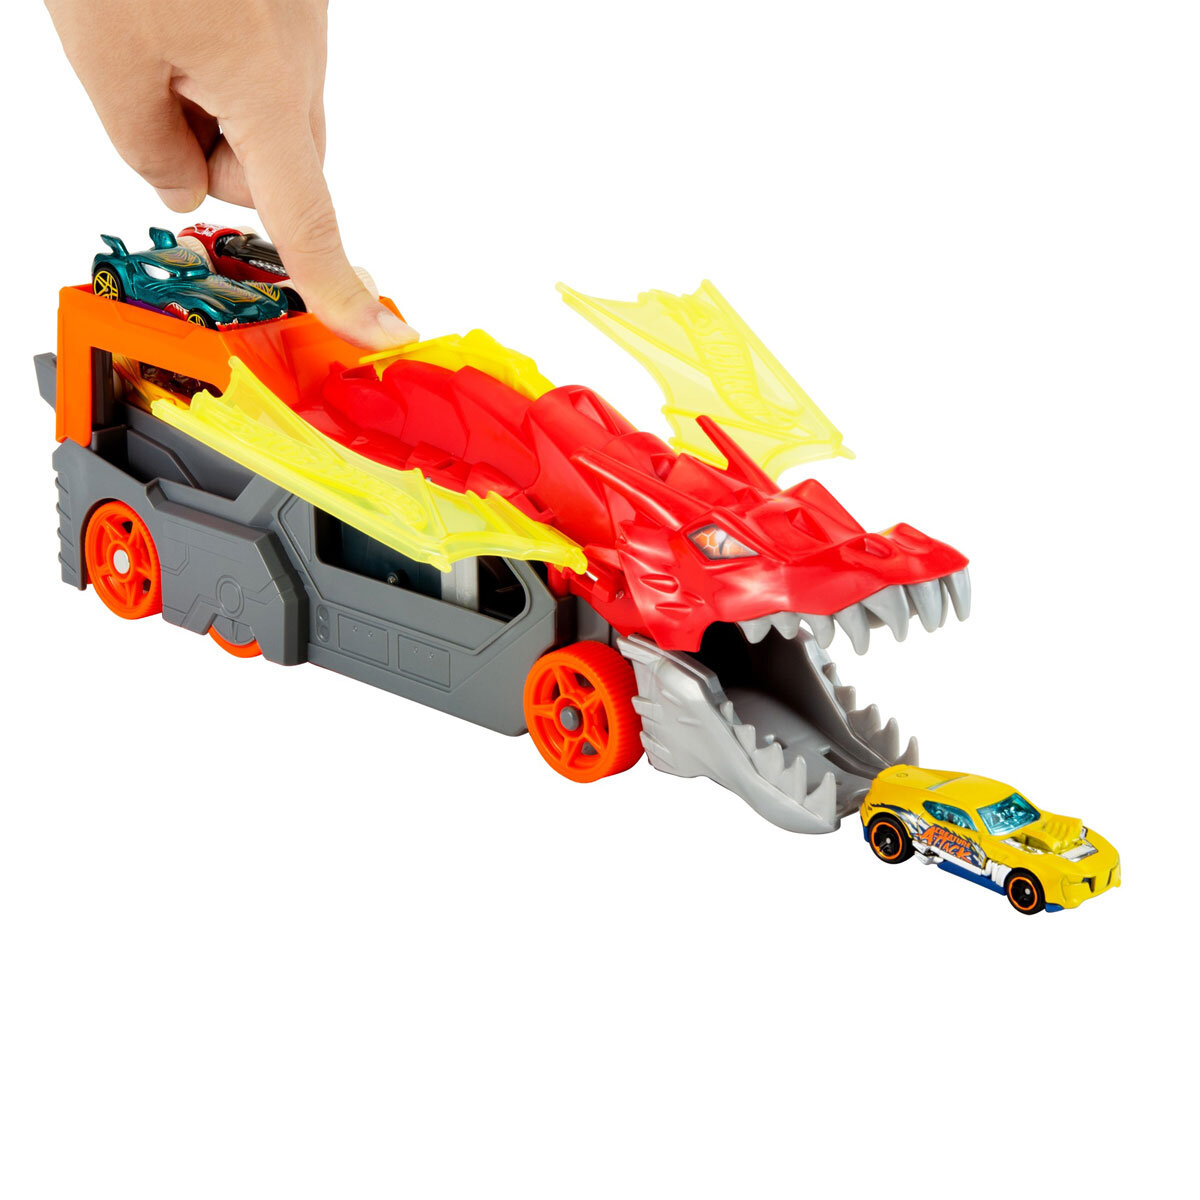 Buy Hot Wheels Haulers Feature2 Image at Costco.co.uk